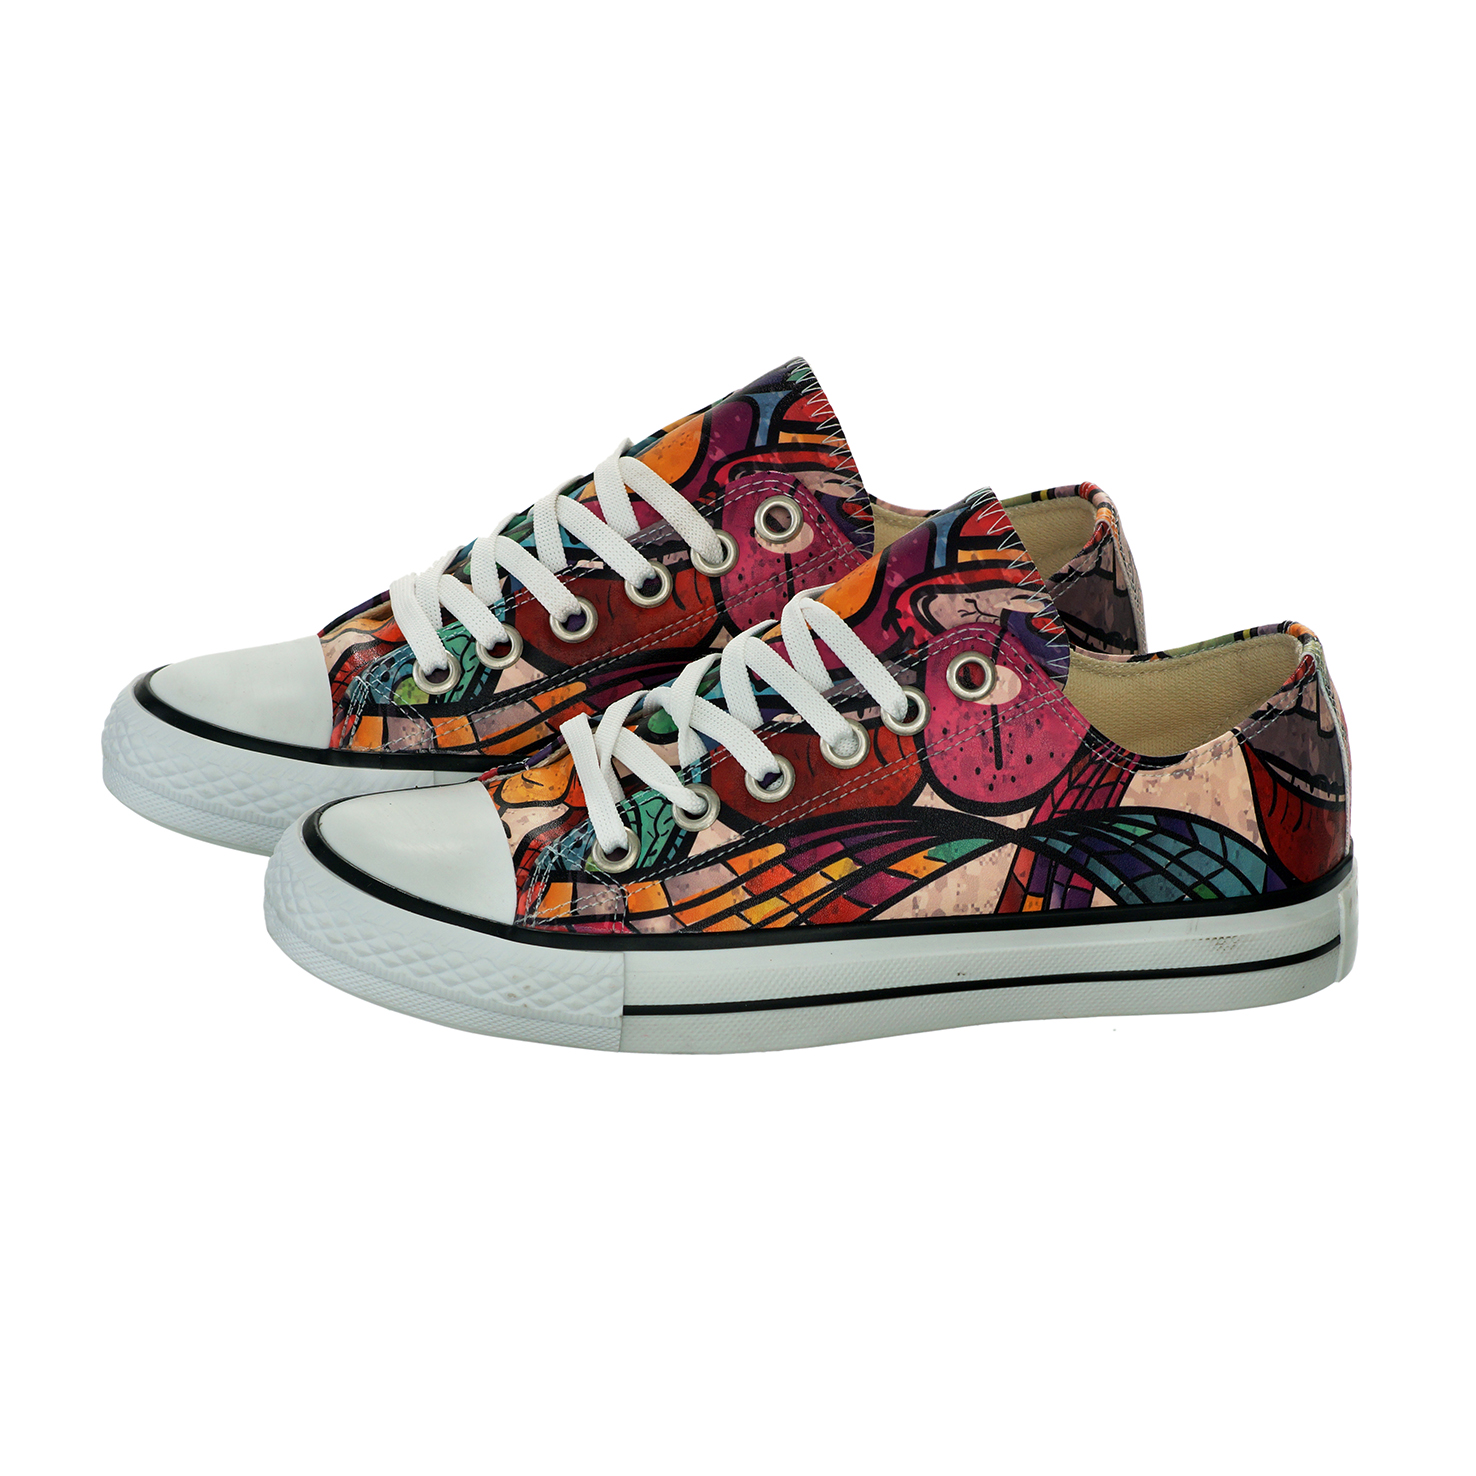 Printed Colorful Women's Sneakers